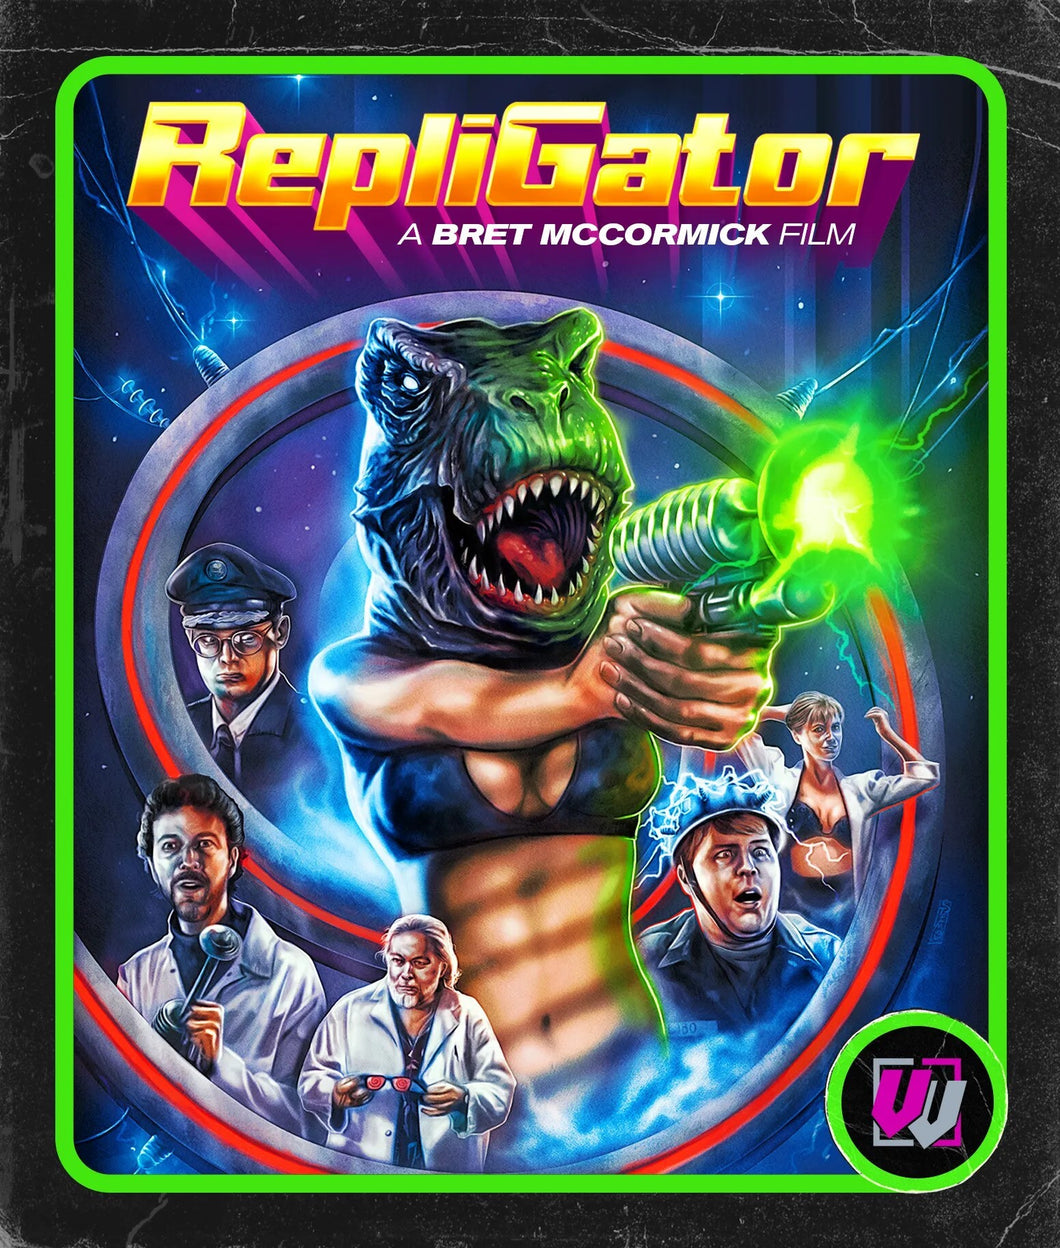 Repligator (1998) - front cover